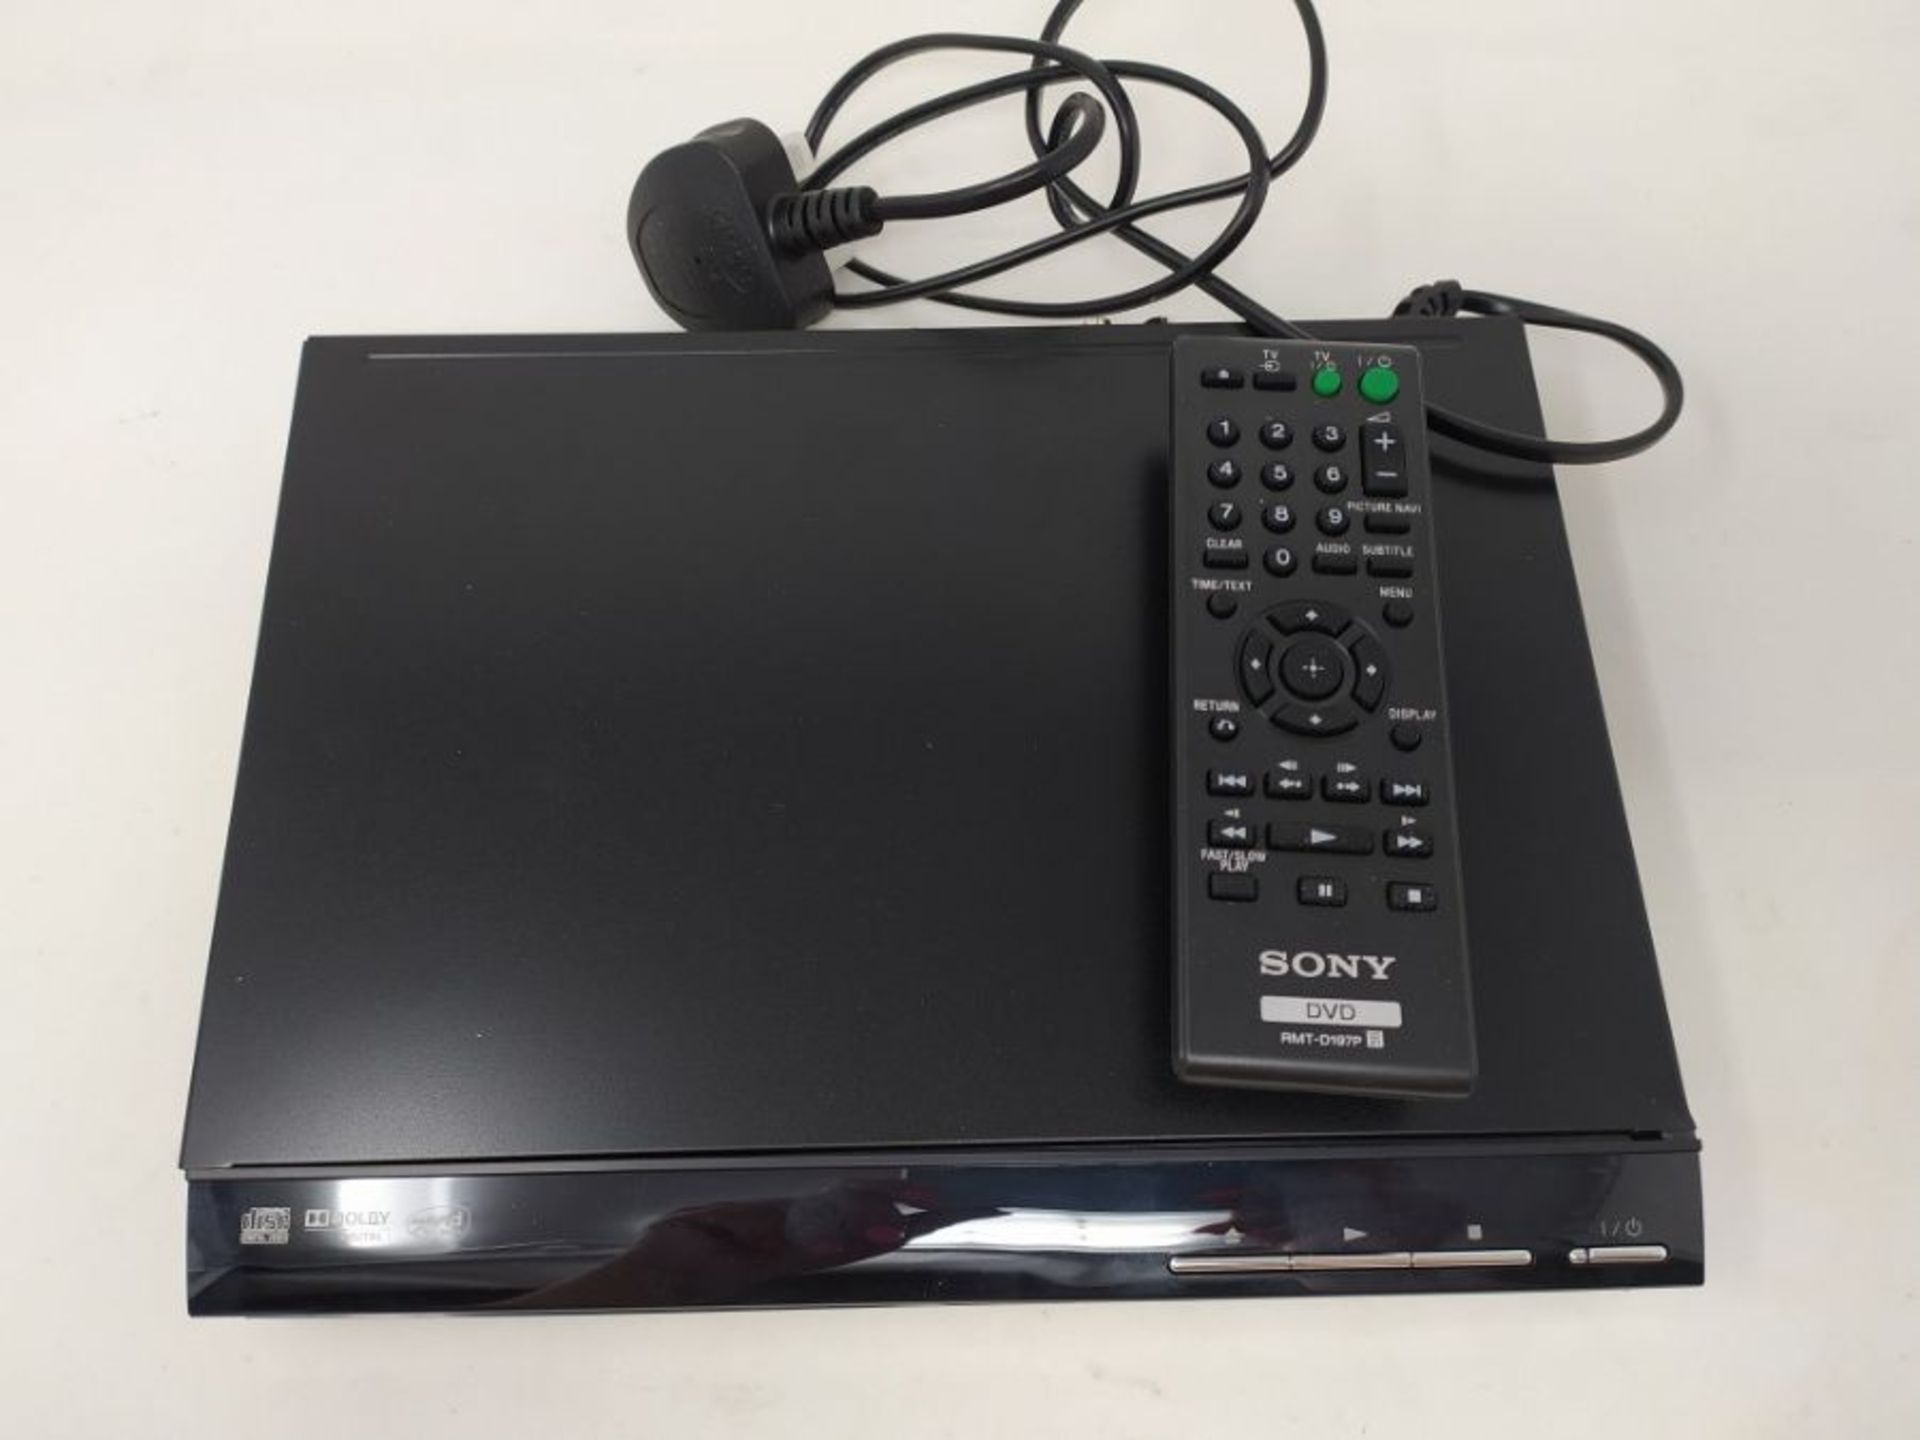 Sony DVPSR760H DVD Upgrade Player (HDMI, 1080 Pixel Upscaling, USB Connectivity), Blac - Image 2 of 2